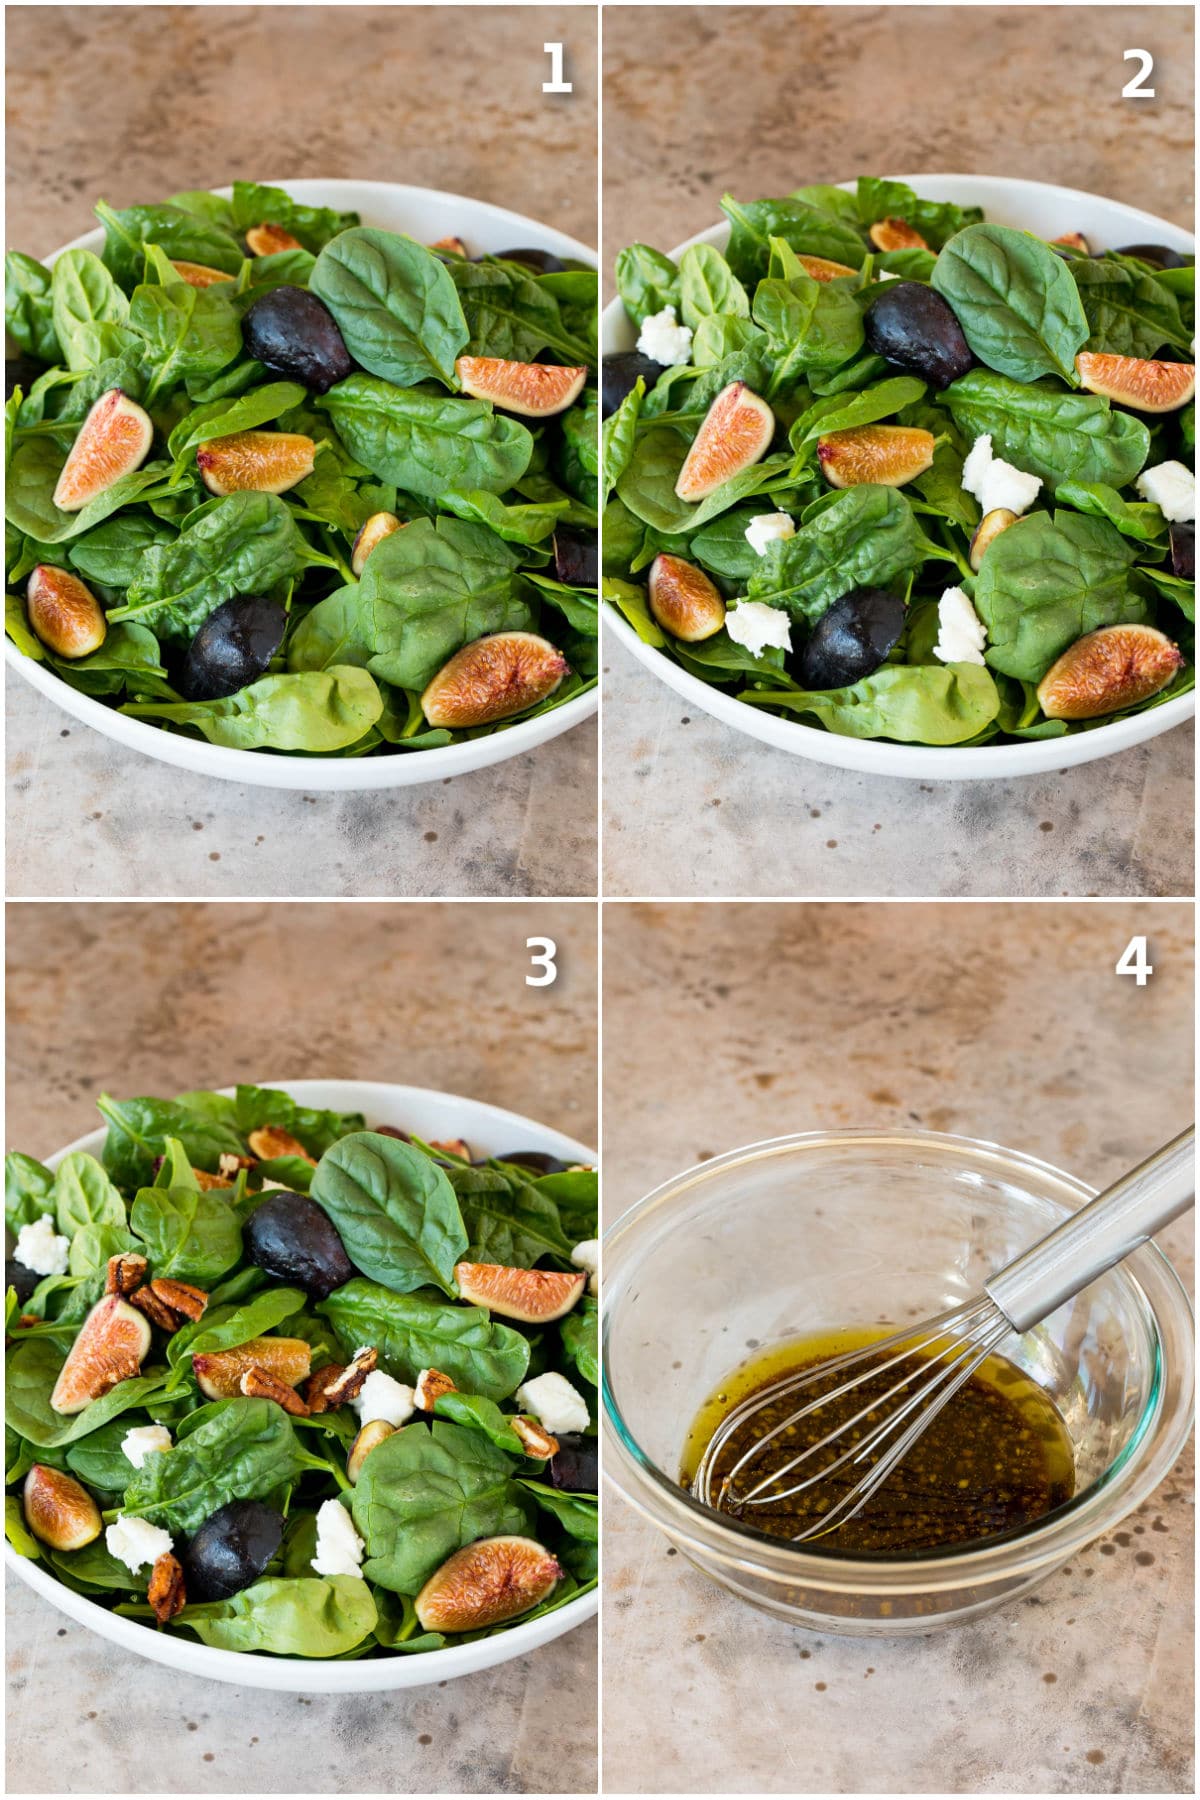 Step by step process shots showing how to make a fig and spinach salad.